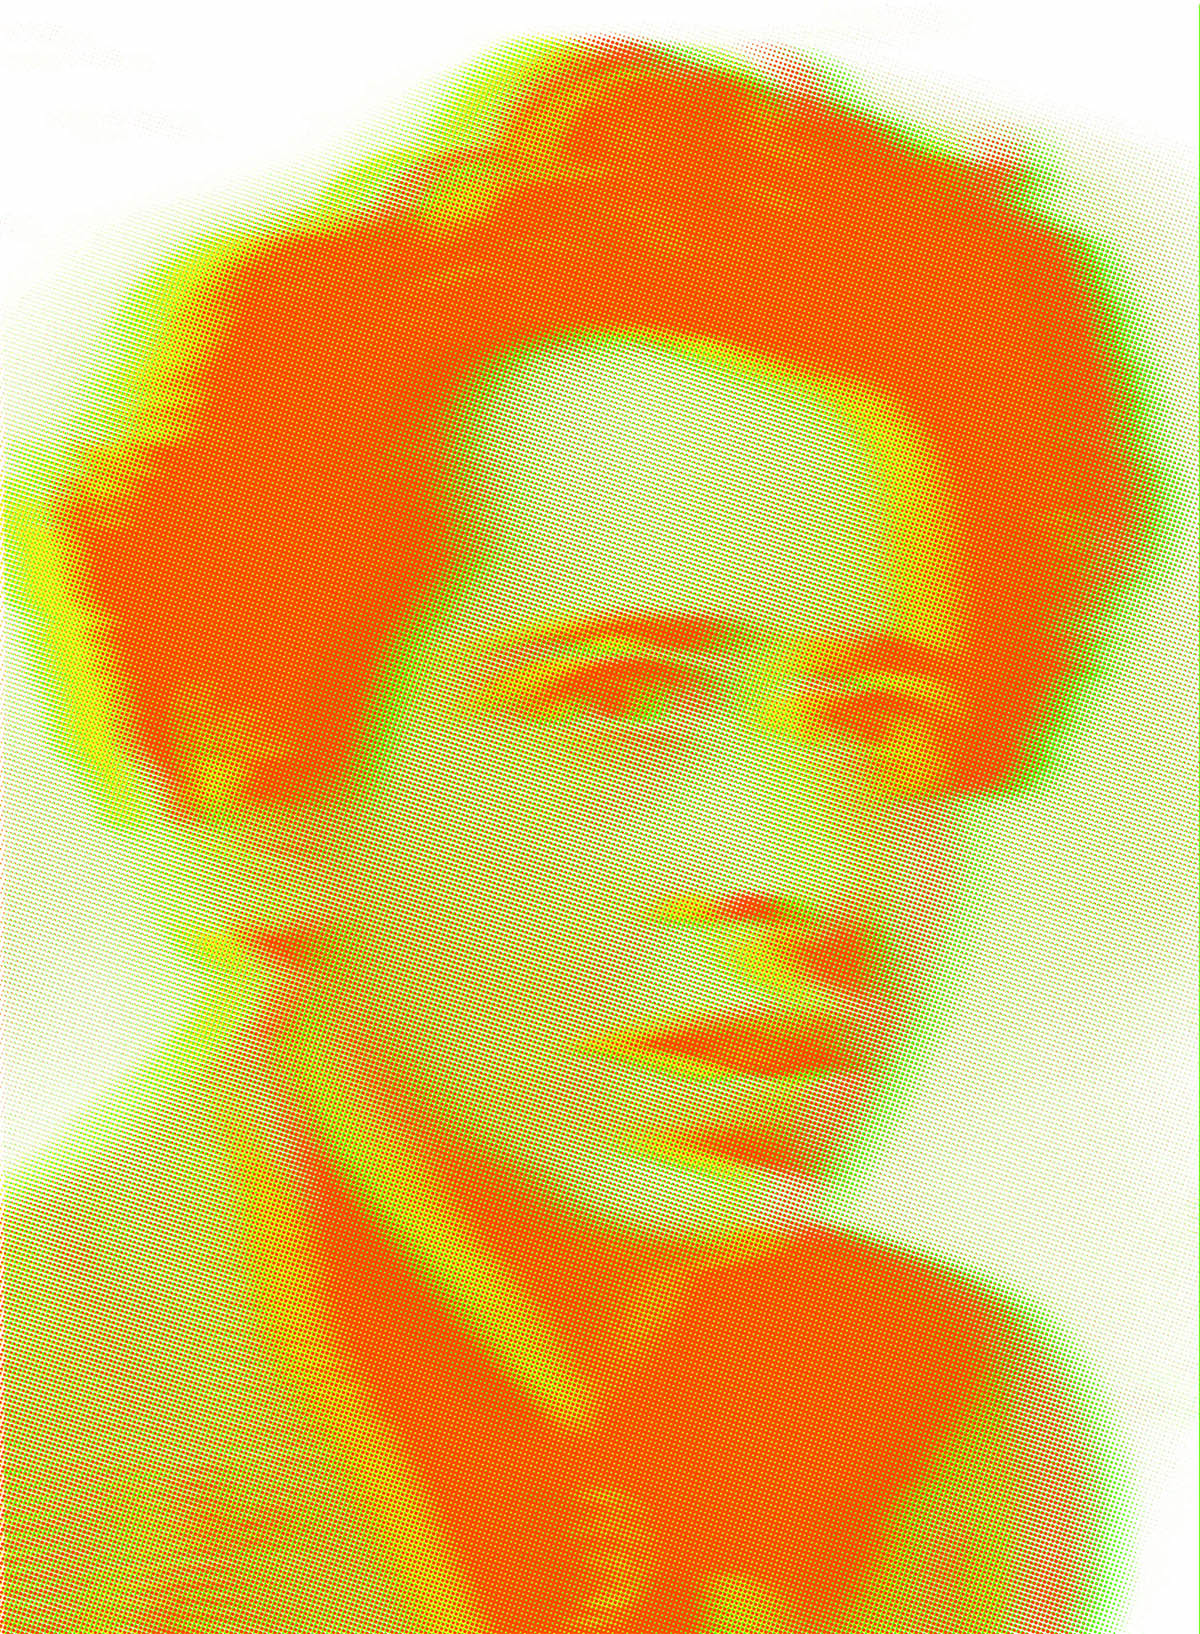 Post-Truth&nbsp;and Politics: Departing from the Thought of Hannah Arendt